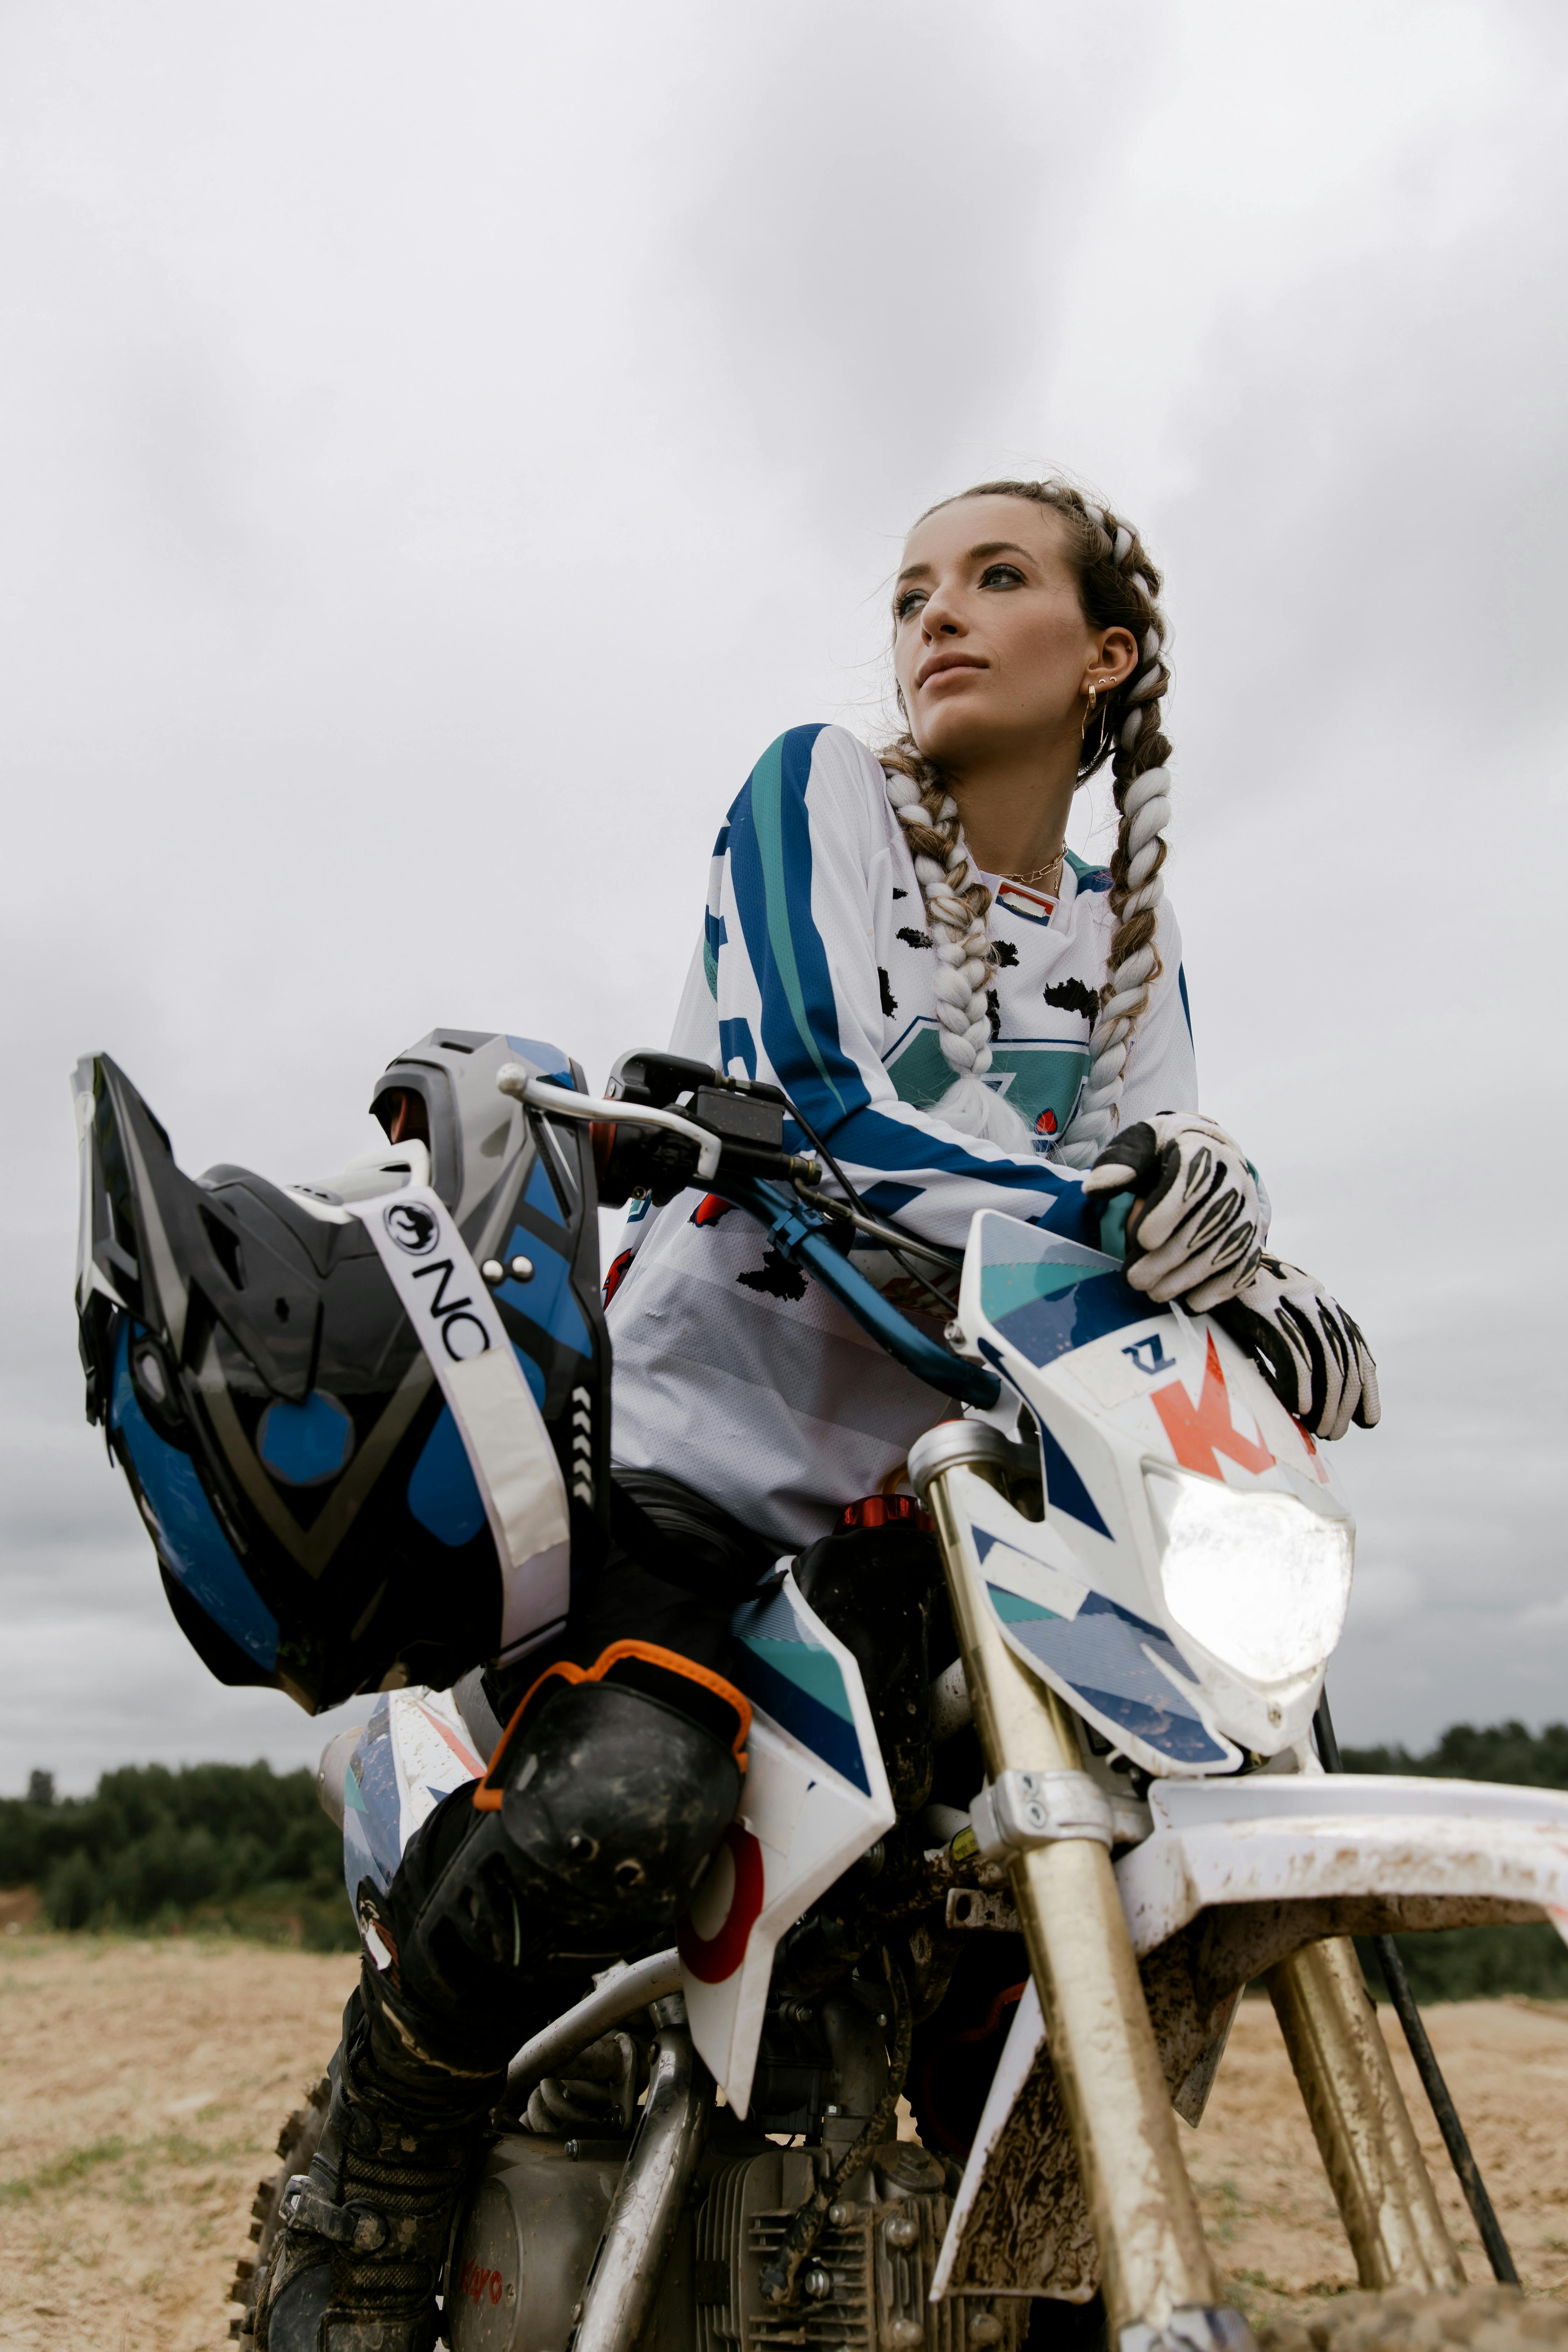 Pretty girl pose with bike stock image. Image of happy - 33580683